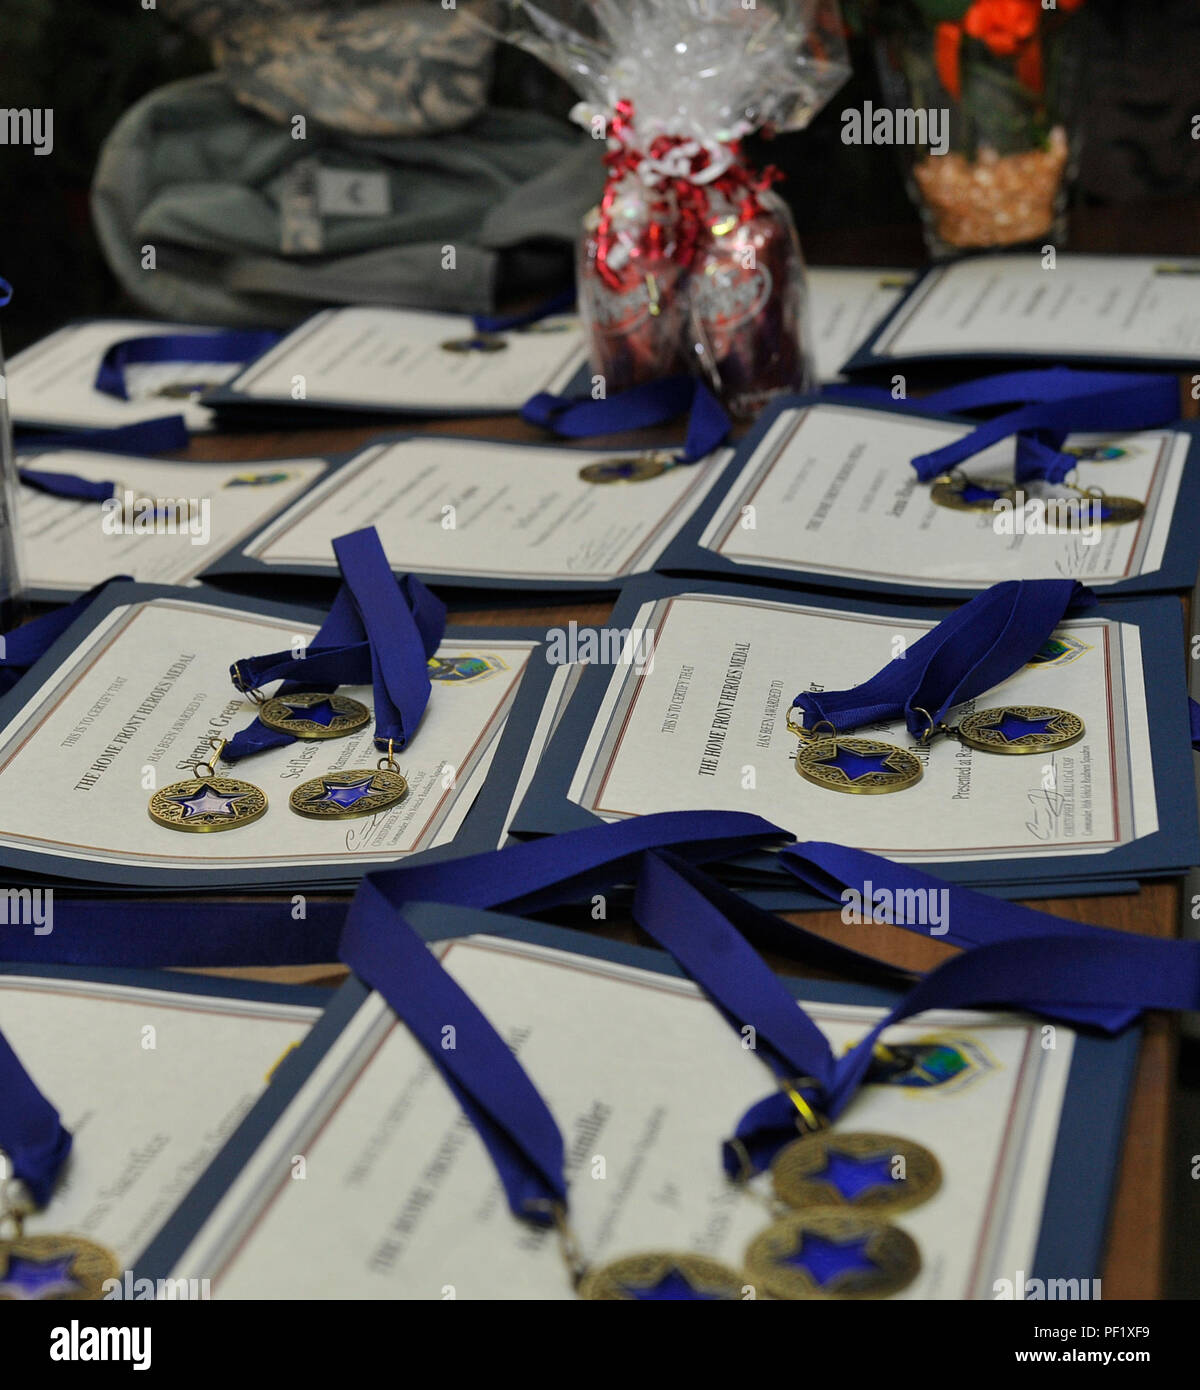 Awards for family members of deployment returnees lay on a table display at a Homefront Heroes ceremony Feb. 19, 2016, at Ramstein Air Base, Germany. The event recognized the sacrifices made by families while deployed members were away. (U.S. Air Force photo/Airman 1st Class Larissa Greatwood) Stock Photo